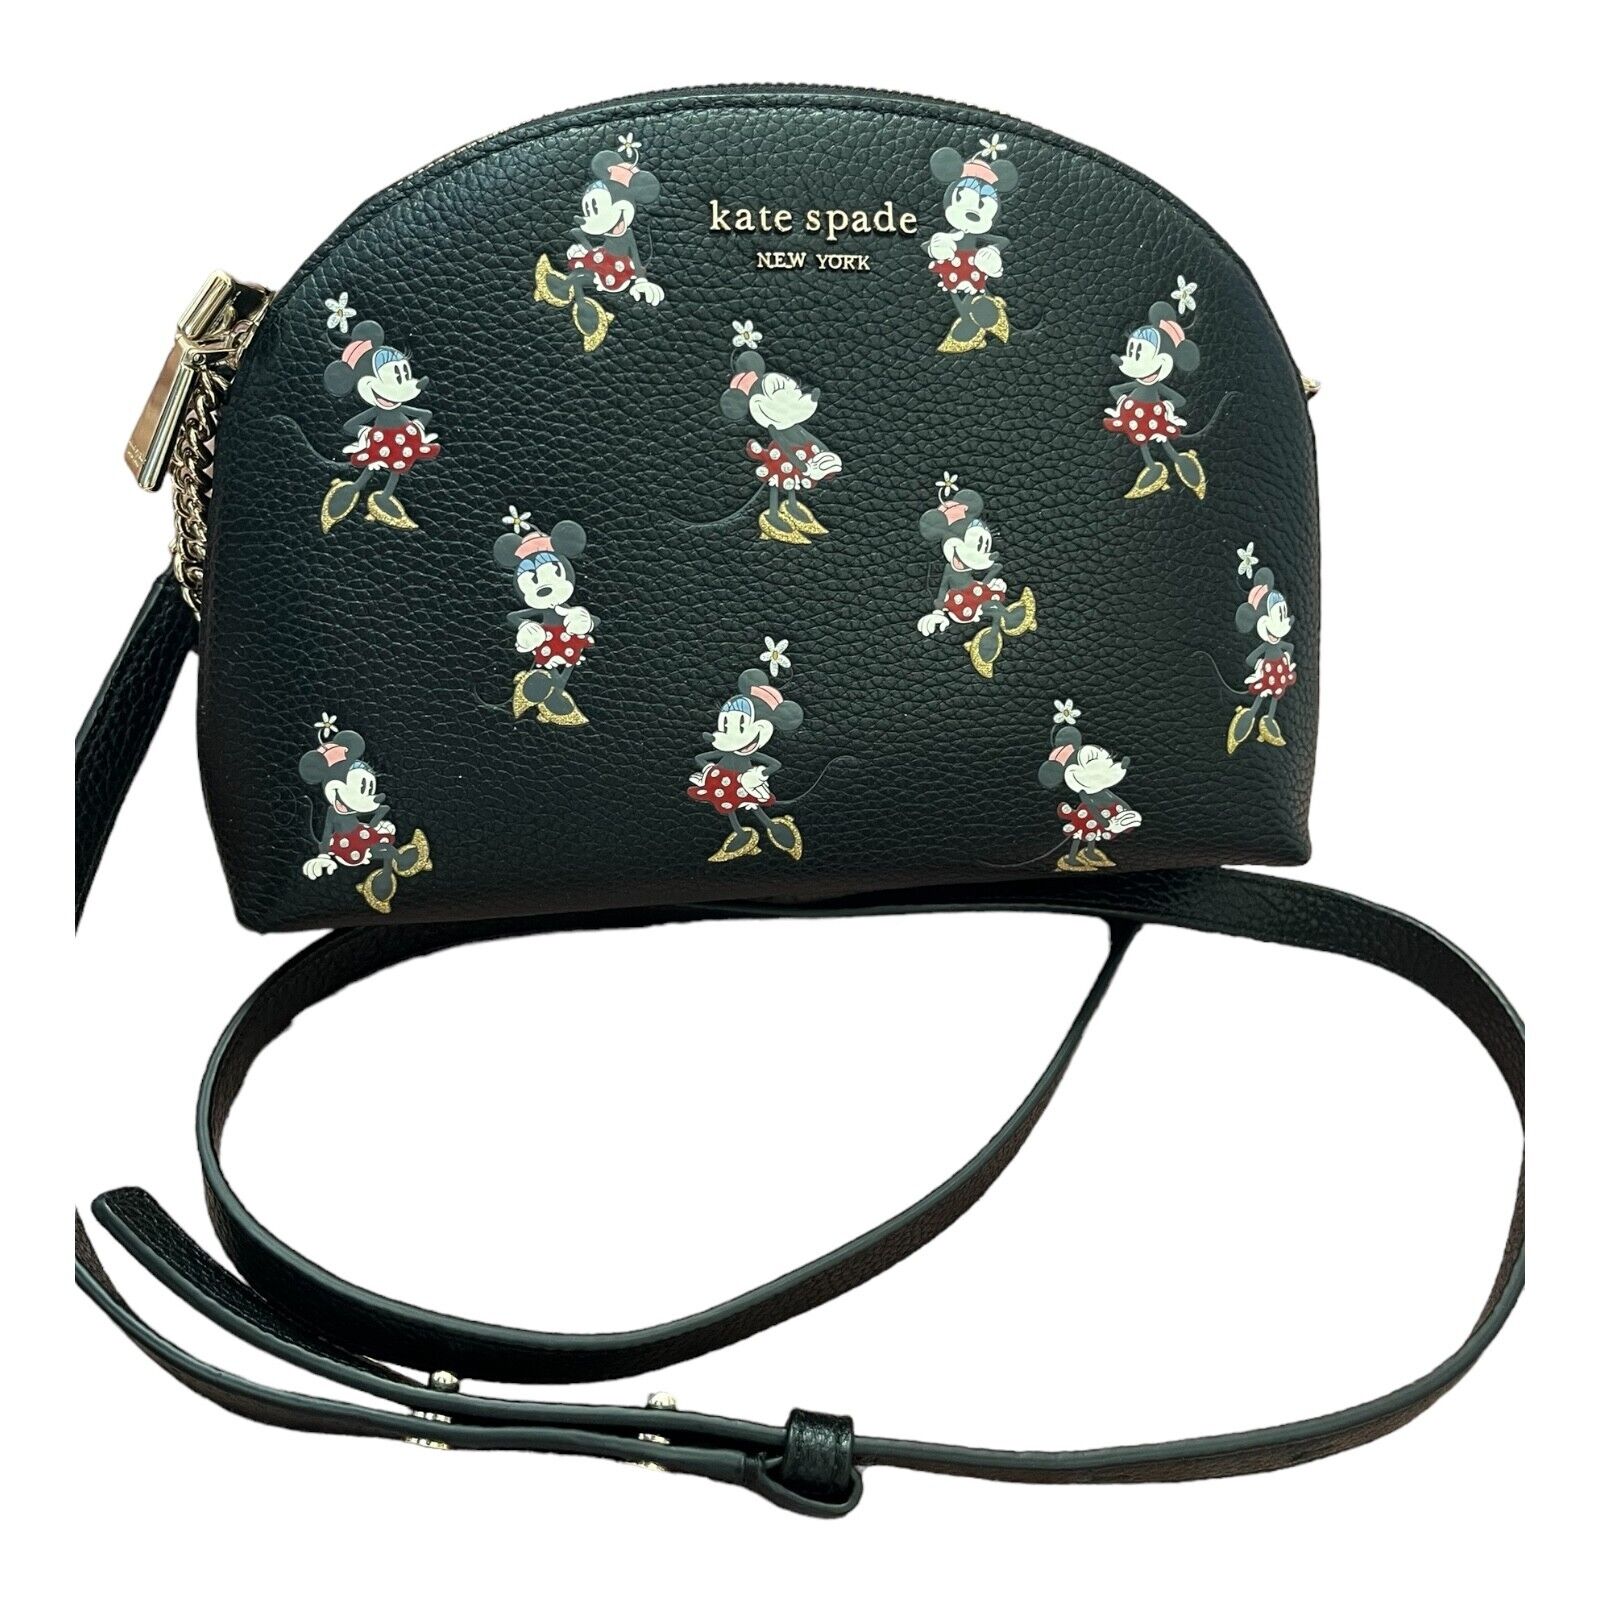 Kate Spade New York Disney Parks Limited Edition Minnie Mouse Dome Purse